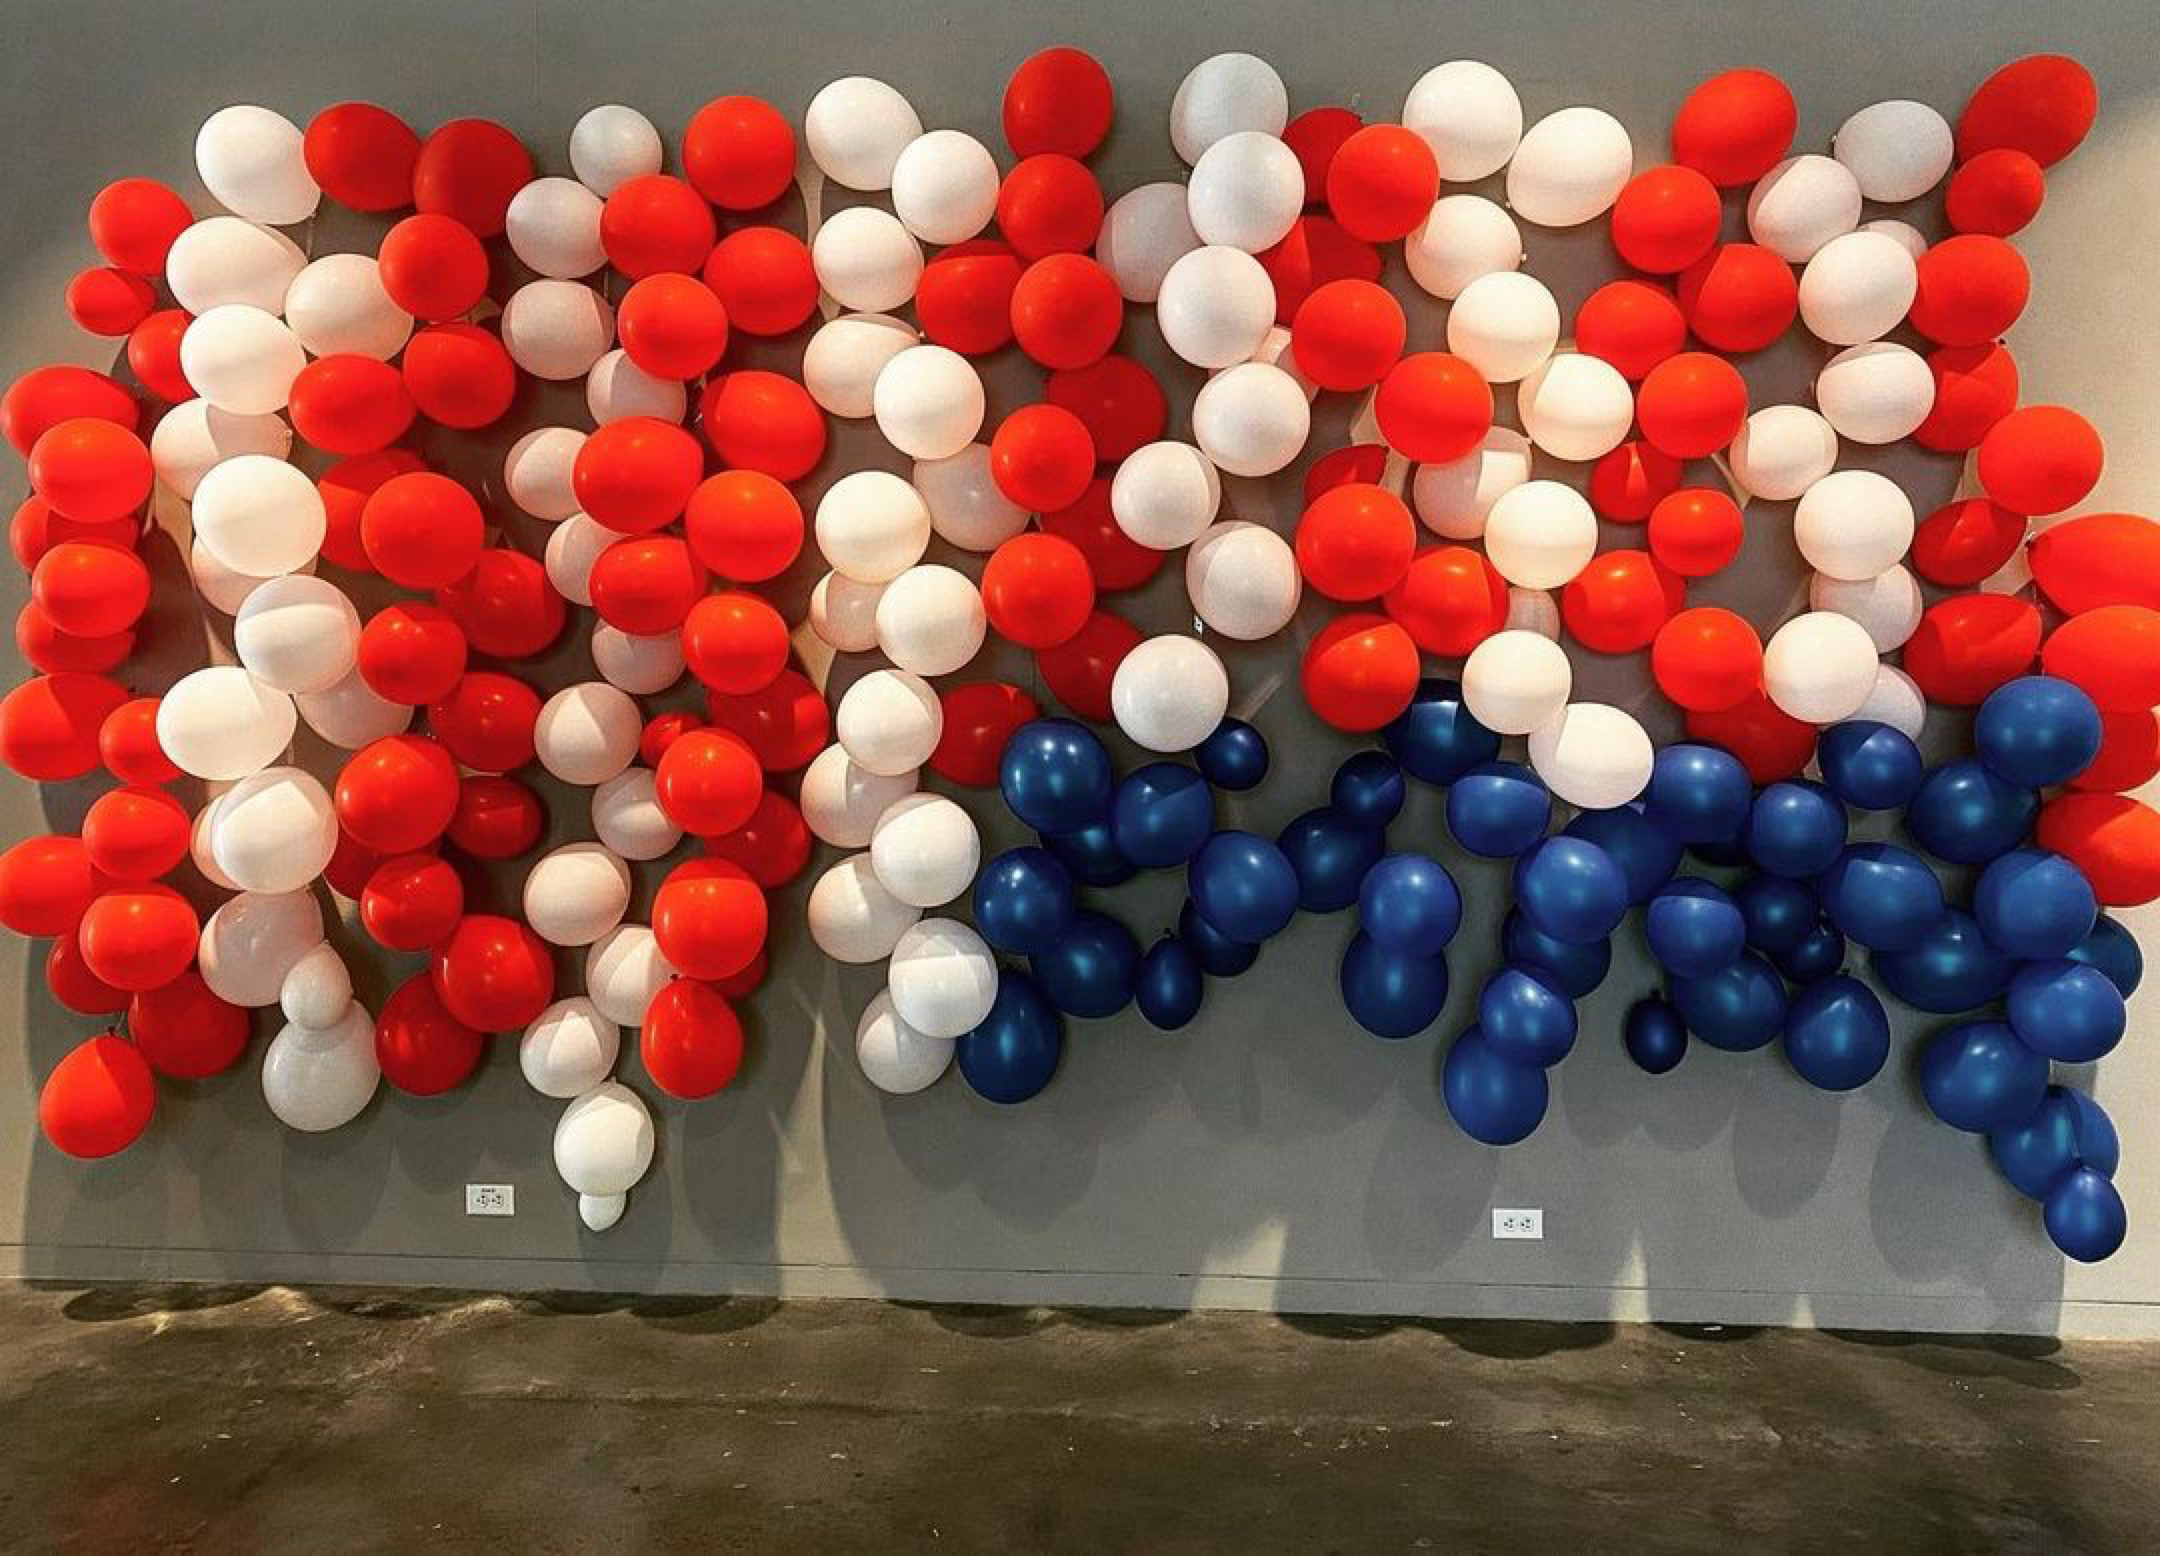 Upside down American flag made out of balloons in an art gallery